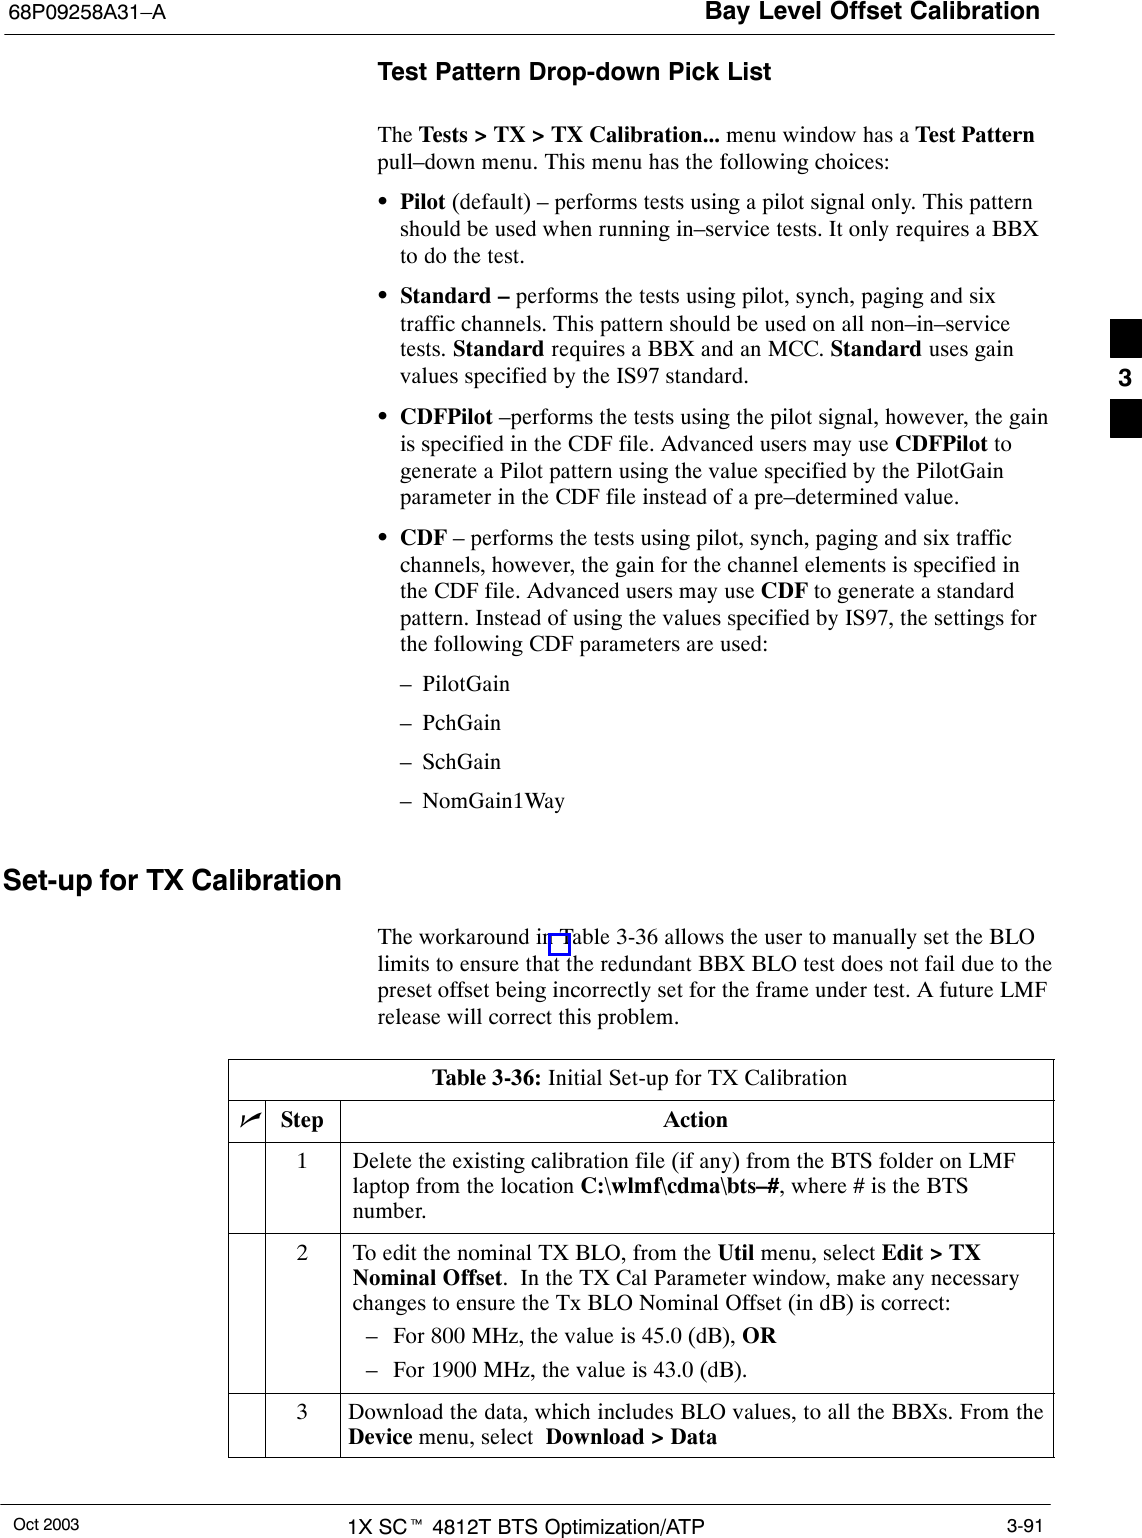 Bay Level Offset Calibration68P09258A31–AOct 2003 1X SCt 4812T BTS Optimization/ATP 3-91Test Pattern Drop-down Pick ListThe Tests &gt; TX &gt; TX Calibration... menu window has a Test Patternpull–down menu. This menu has the following choices:SPilot (default) – performs tests using a pilot signal only. This patternshould be used when running in–service tests. It only requires a BBXto do the test.SStandard – performs the tests using pilot, synch, paging and sixtraffic channels. This pattern should be used on all non–in–servicetests. Standard requires a BBX and an MCC. Standard uses gainvalues specified by the IS97 standard.SCDFPilot –performs the tests using the pilot signal, however, the gainis specified in the CDF file. Advanced users may use CDFPilot togenerate a Pilot pattern using the value specified by the PilotGainparameter in the CDF file instead of a pre–determined value.SCDF – performs the tests using pilot, synch, paging and six trafficchannels, however, the gain for the channel elements is specified inthe CDF file. Advanced users may use CDF to generate a standardpattern. Instead of using the values specified by IS97, the settings forthe following CDF parameters are used:– PilotGain– PchGain– SchGain– NomGain1WaySet-up for TX CalibrationThe workaround in Table 3-36 allows the user to manually set the BLOlimits to ensure that the redundant BBX BLO test does not fail due to thepreset offset being incorrectly set for the frame under test. A future LMFrelease will correct this problem.Table 3-36: Initial Set-up for TX CalibrationnStep Action1Delete the existing calibration file (if any) from the BTS folder on LMFlaptop from the location C:\wlmf\cdma\bts–#, where # is the BTSnumber.2To edit the nominal TX BLO, from the Util menu, select Edit &gt; TXNominal Offset.  In the TX Cal Parameter window, make any necessarychanges to ensure the Tx BLO Nominal Offset (in dB) is correct:– For 800 MHz, the value is 45.0 (dB), OR– For 1900 MHz, the value is 43.0 (dB).3Download the data, which includes BLO values, to all the BBXs. From theDevice menu, select  Download &gt; Data 3